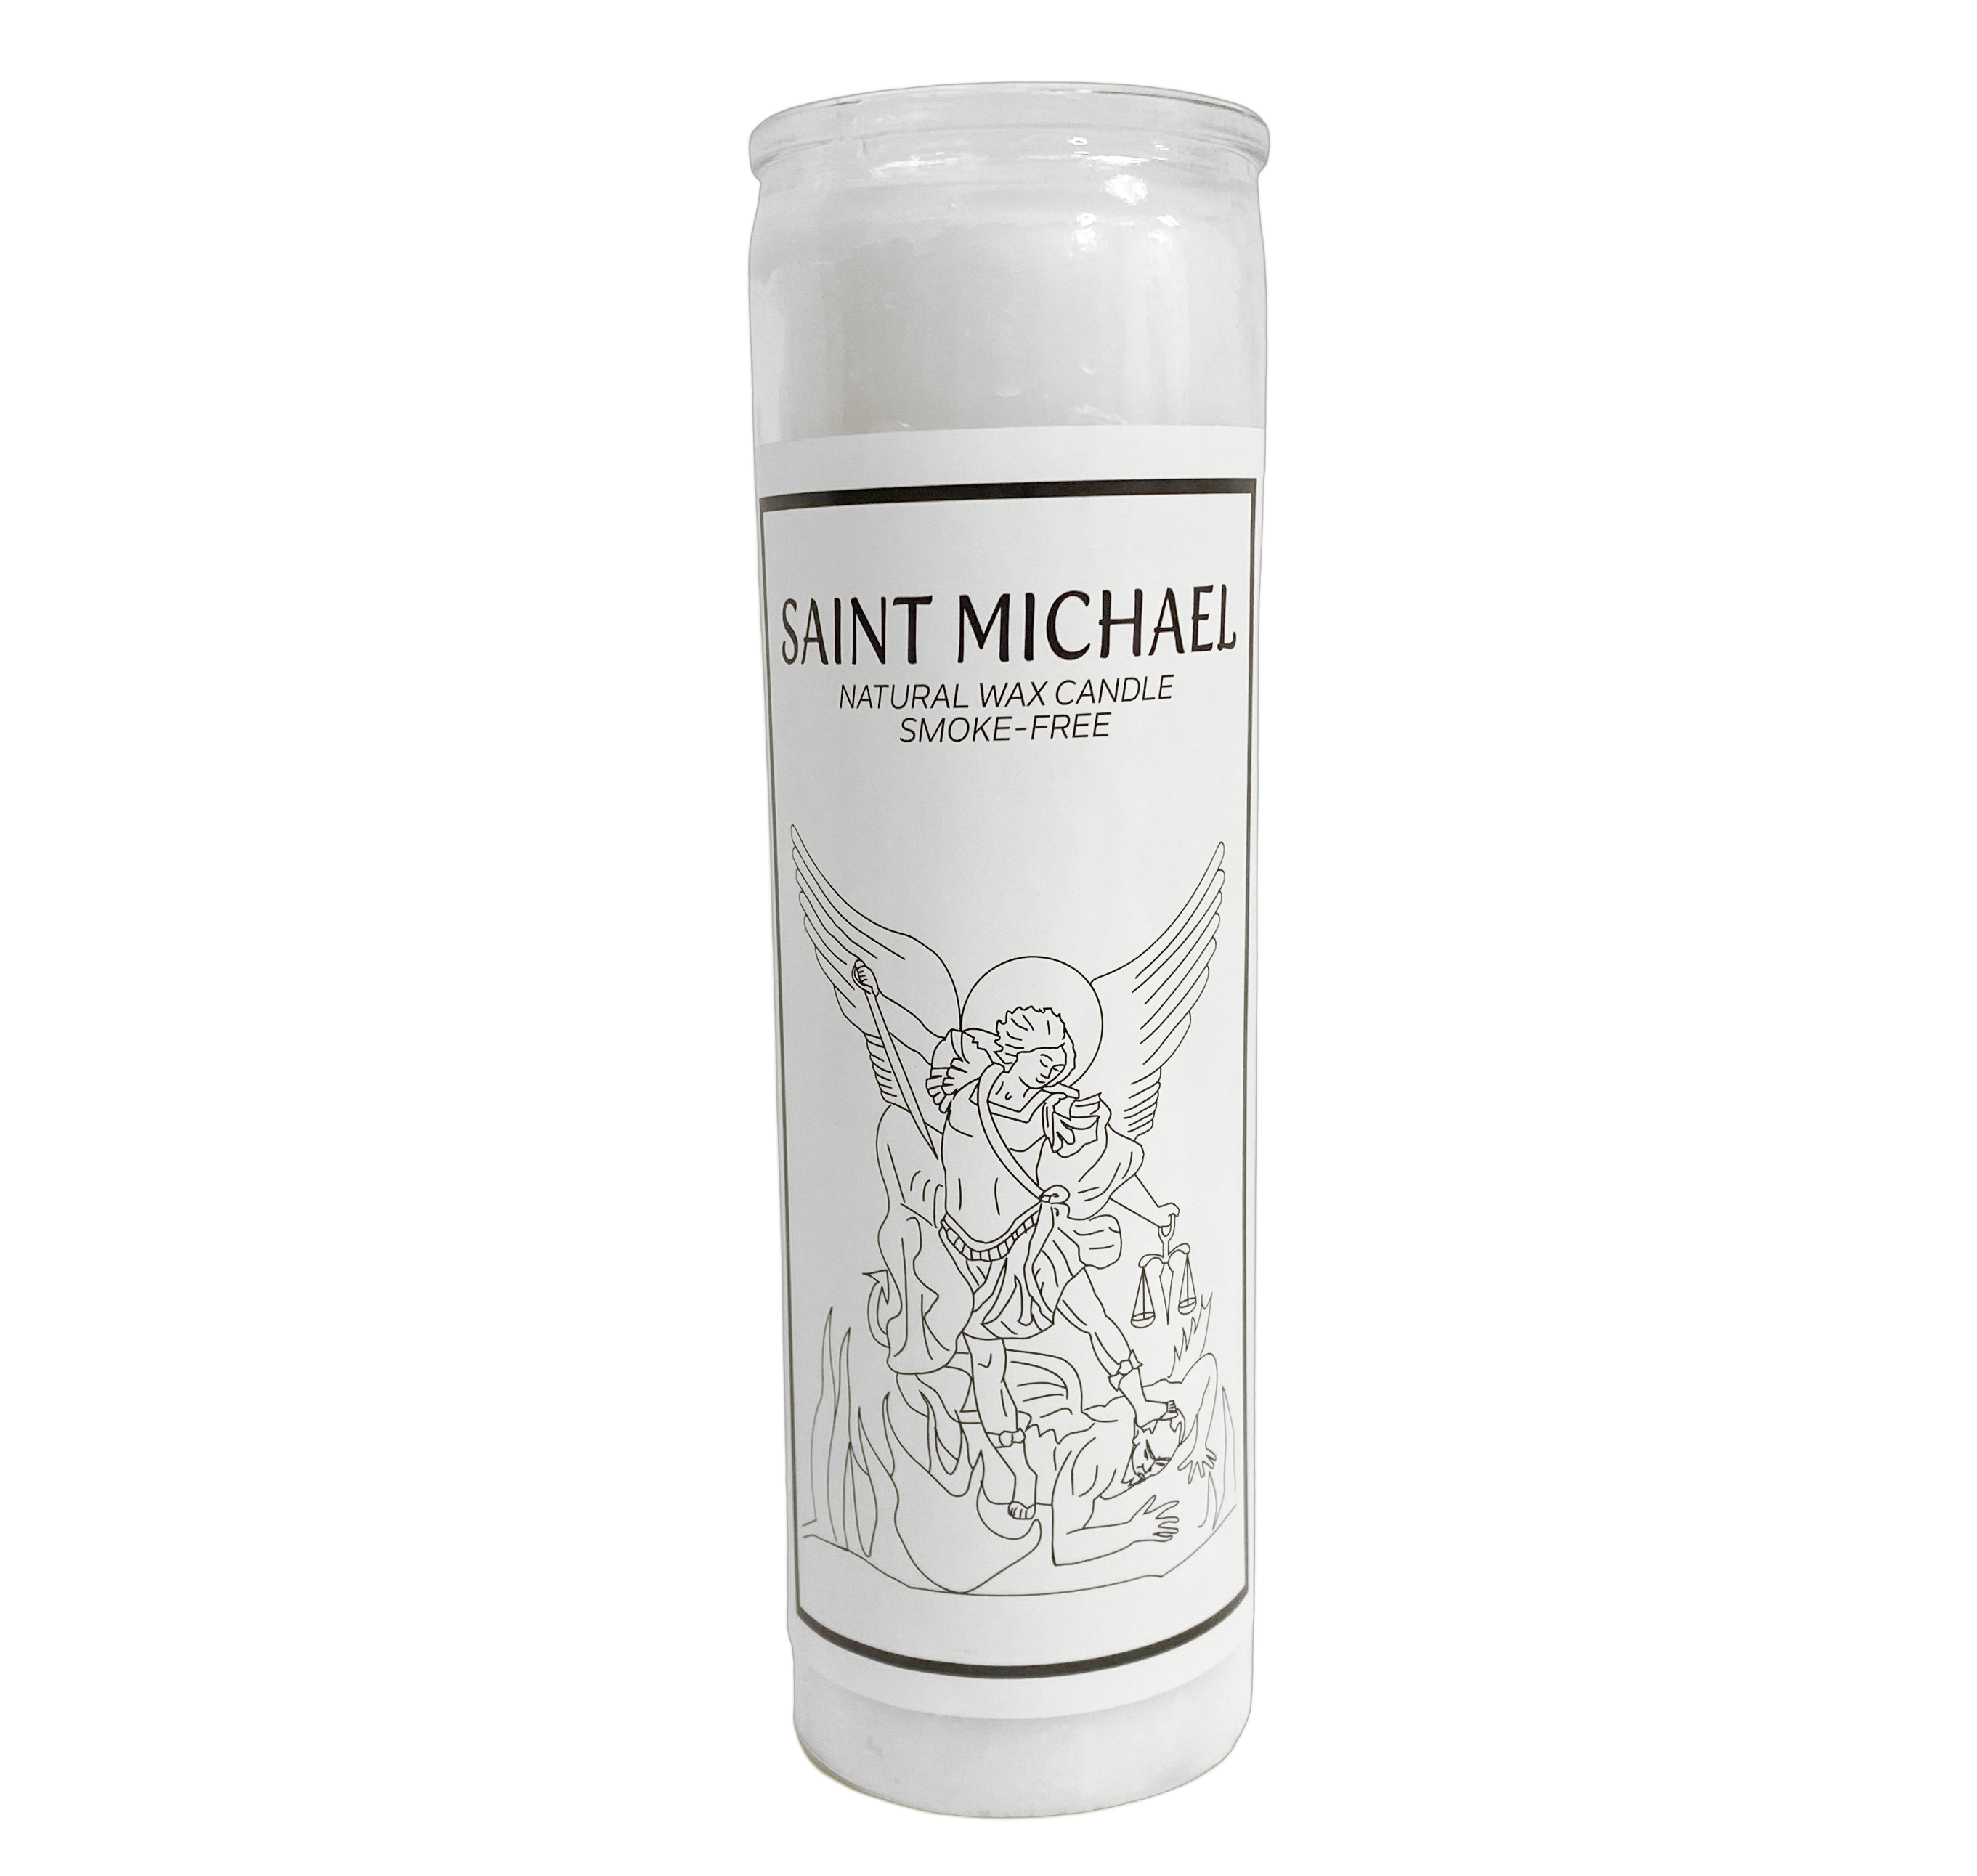 7-Day Prayer Candle- St. Michael (12 Count)